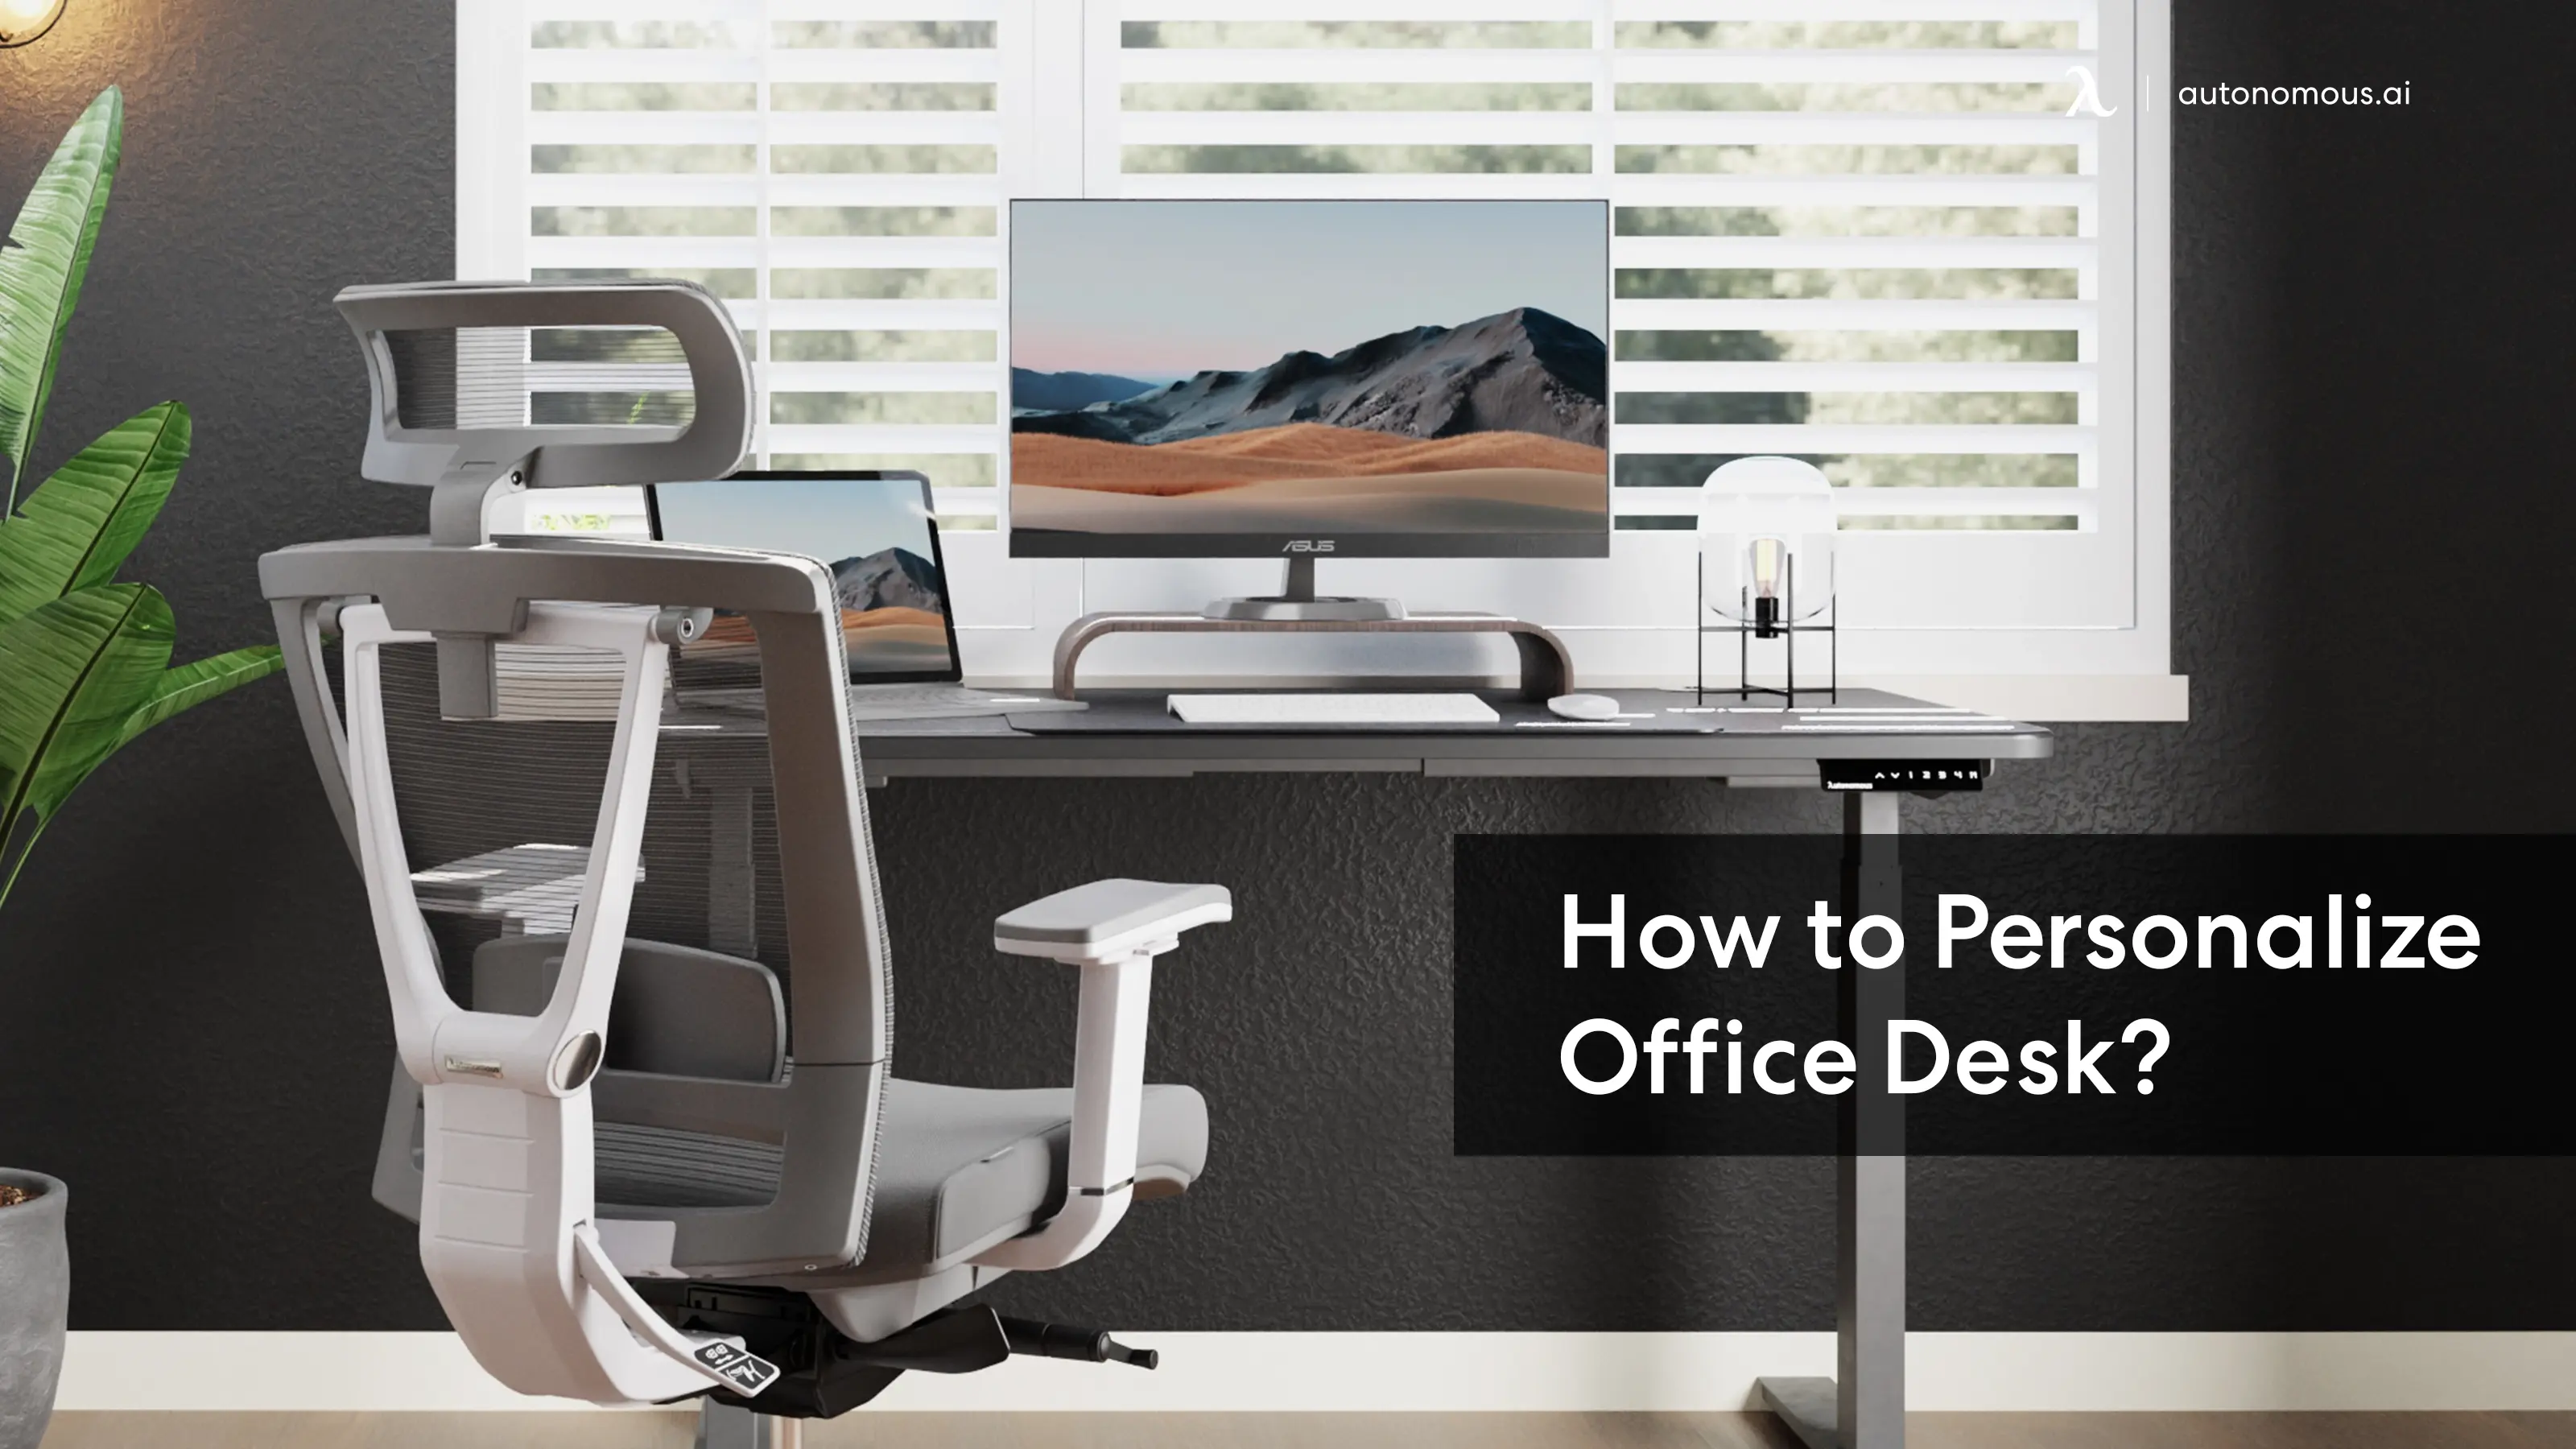 How To Personalize Your Office Desk: 10 Simple Ideas